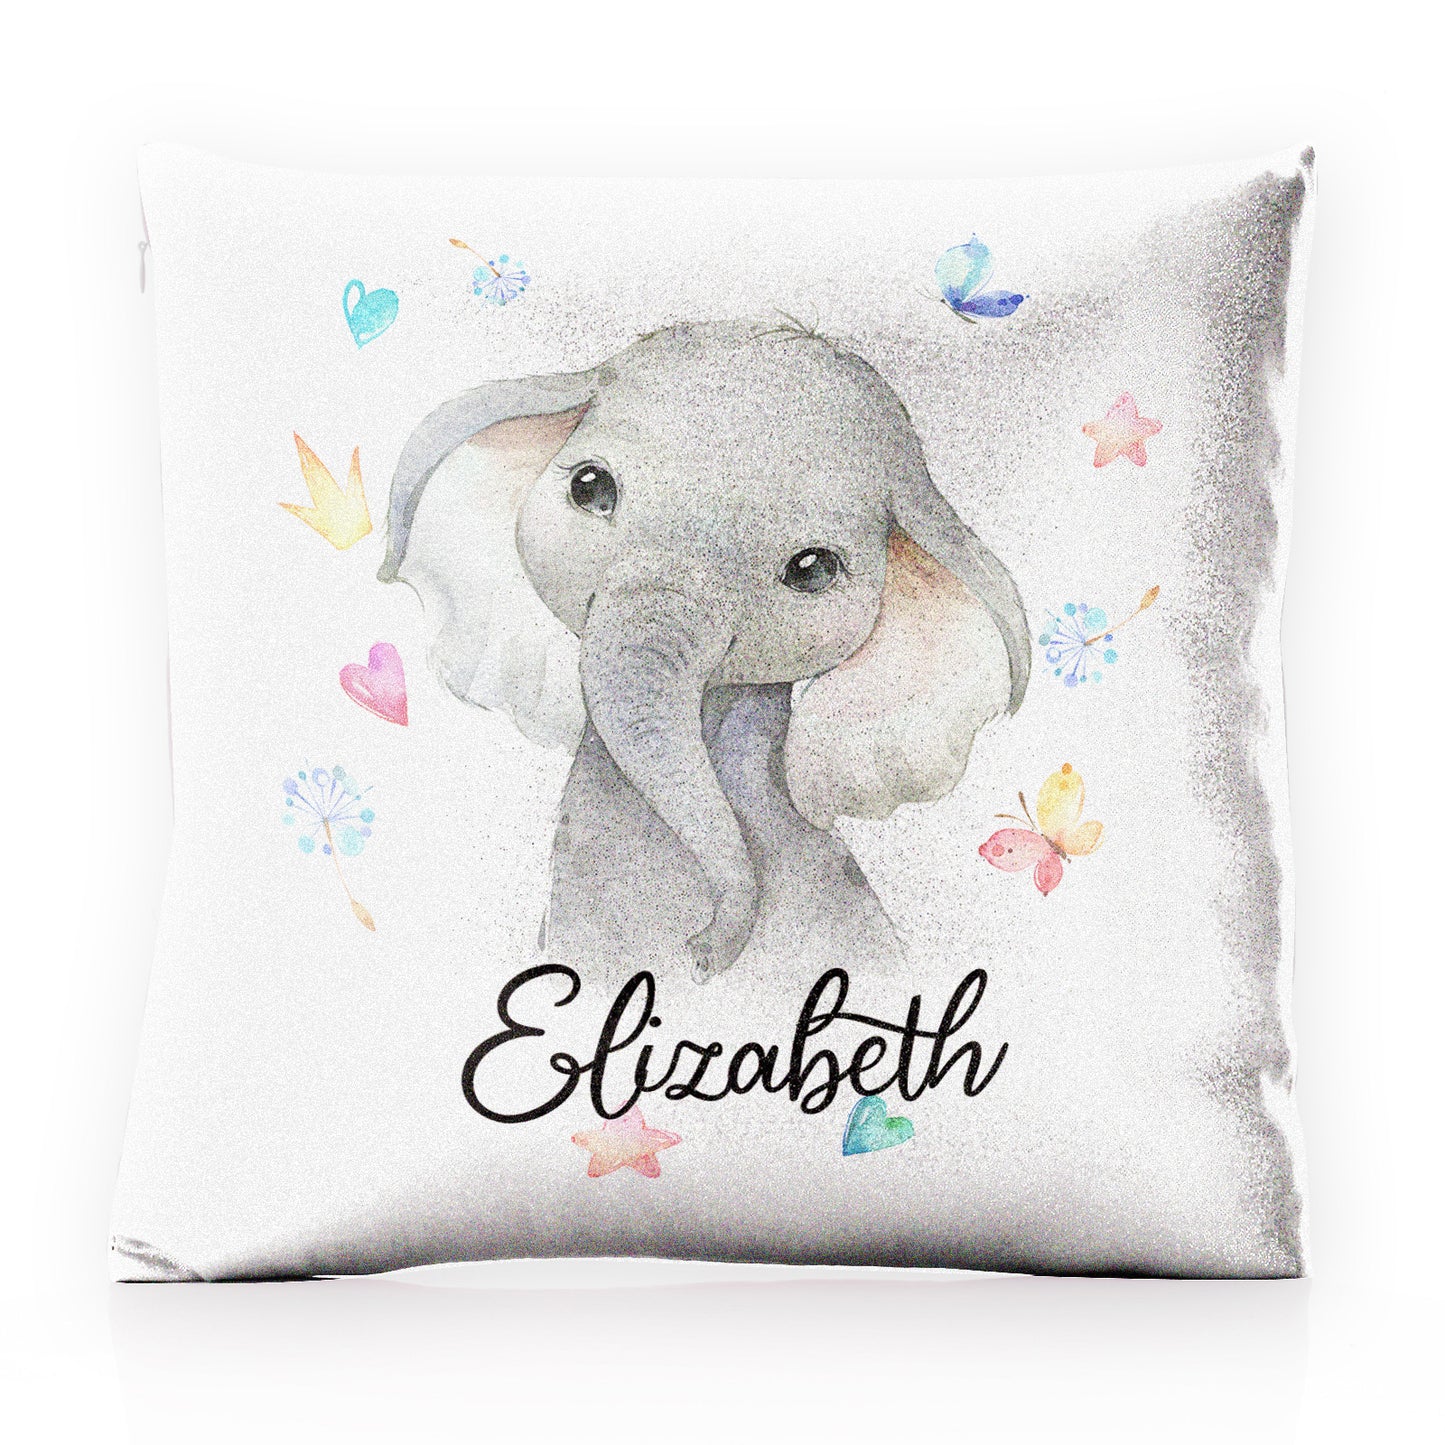 Personalised Glitter Cushion with Grey Elephant with Hearts Stars Crowns Butterfly and Cute Text